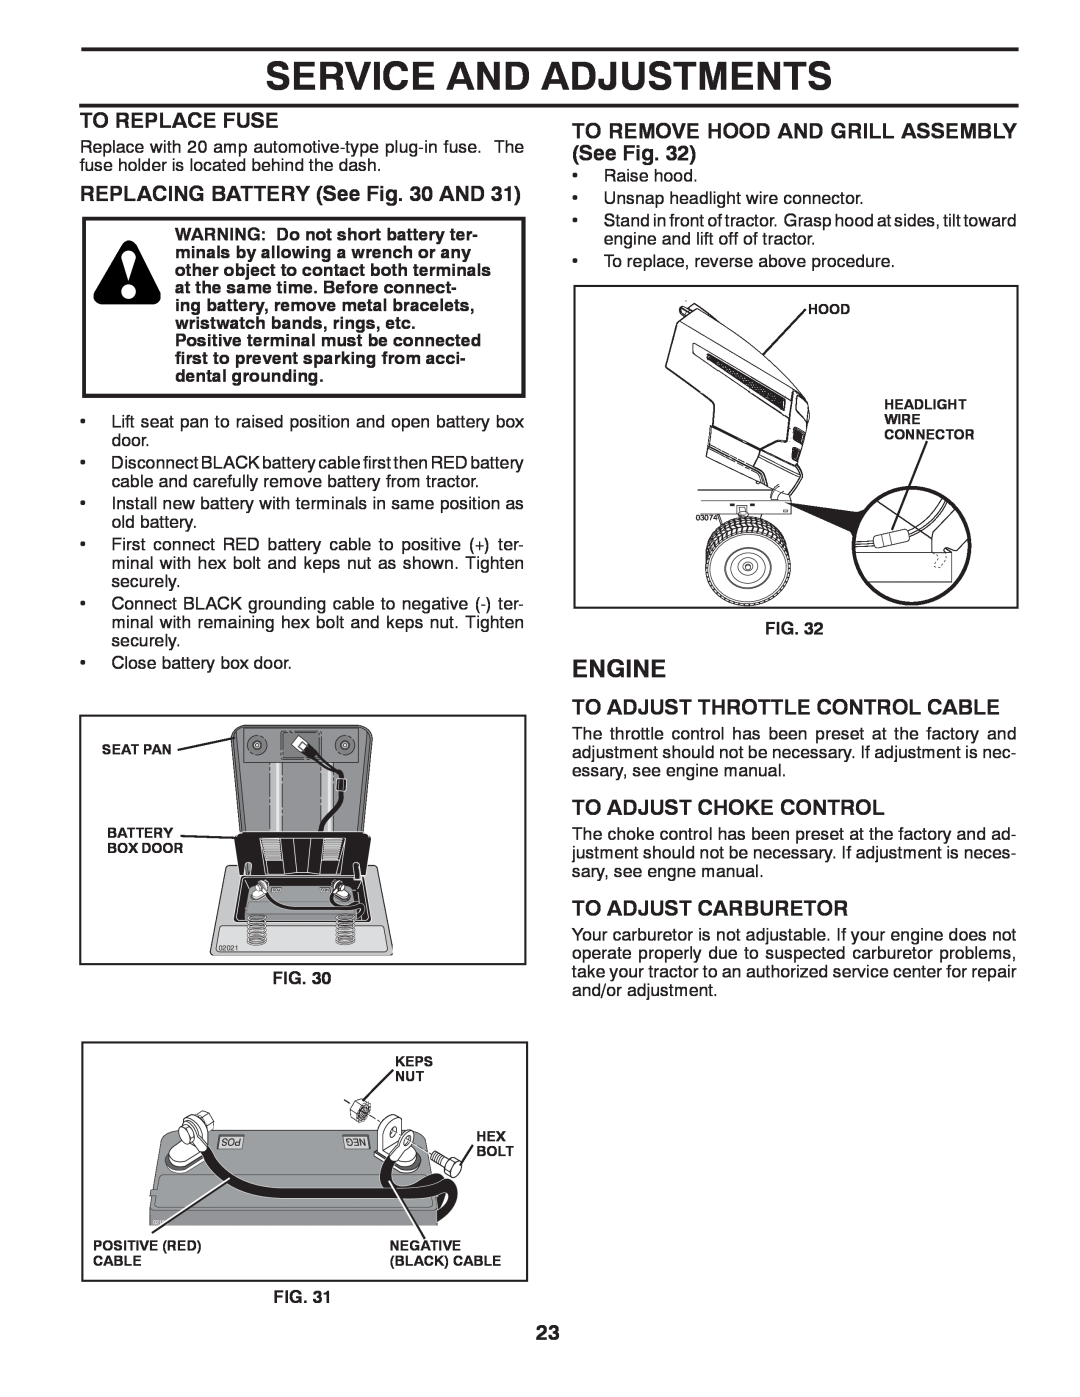 Husqvarna LT1597 manual To Replace Fuse, REPLACING BATTERY See AND, TO REMOVE HOOD AND GRILL ASSEMBLY See Fig, Engine 